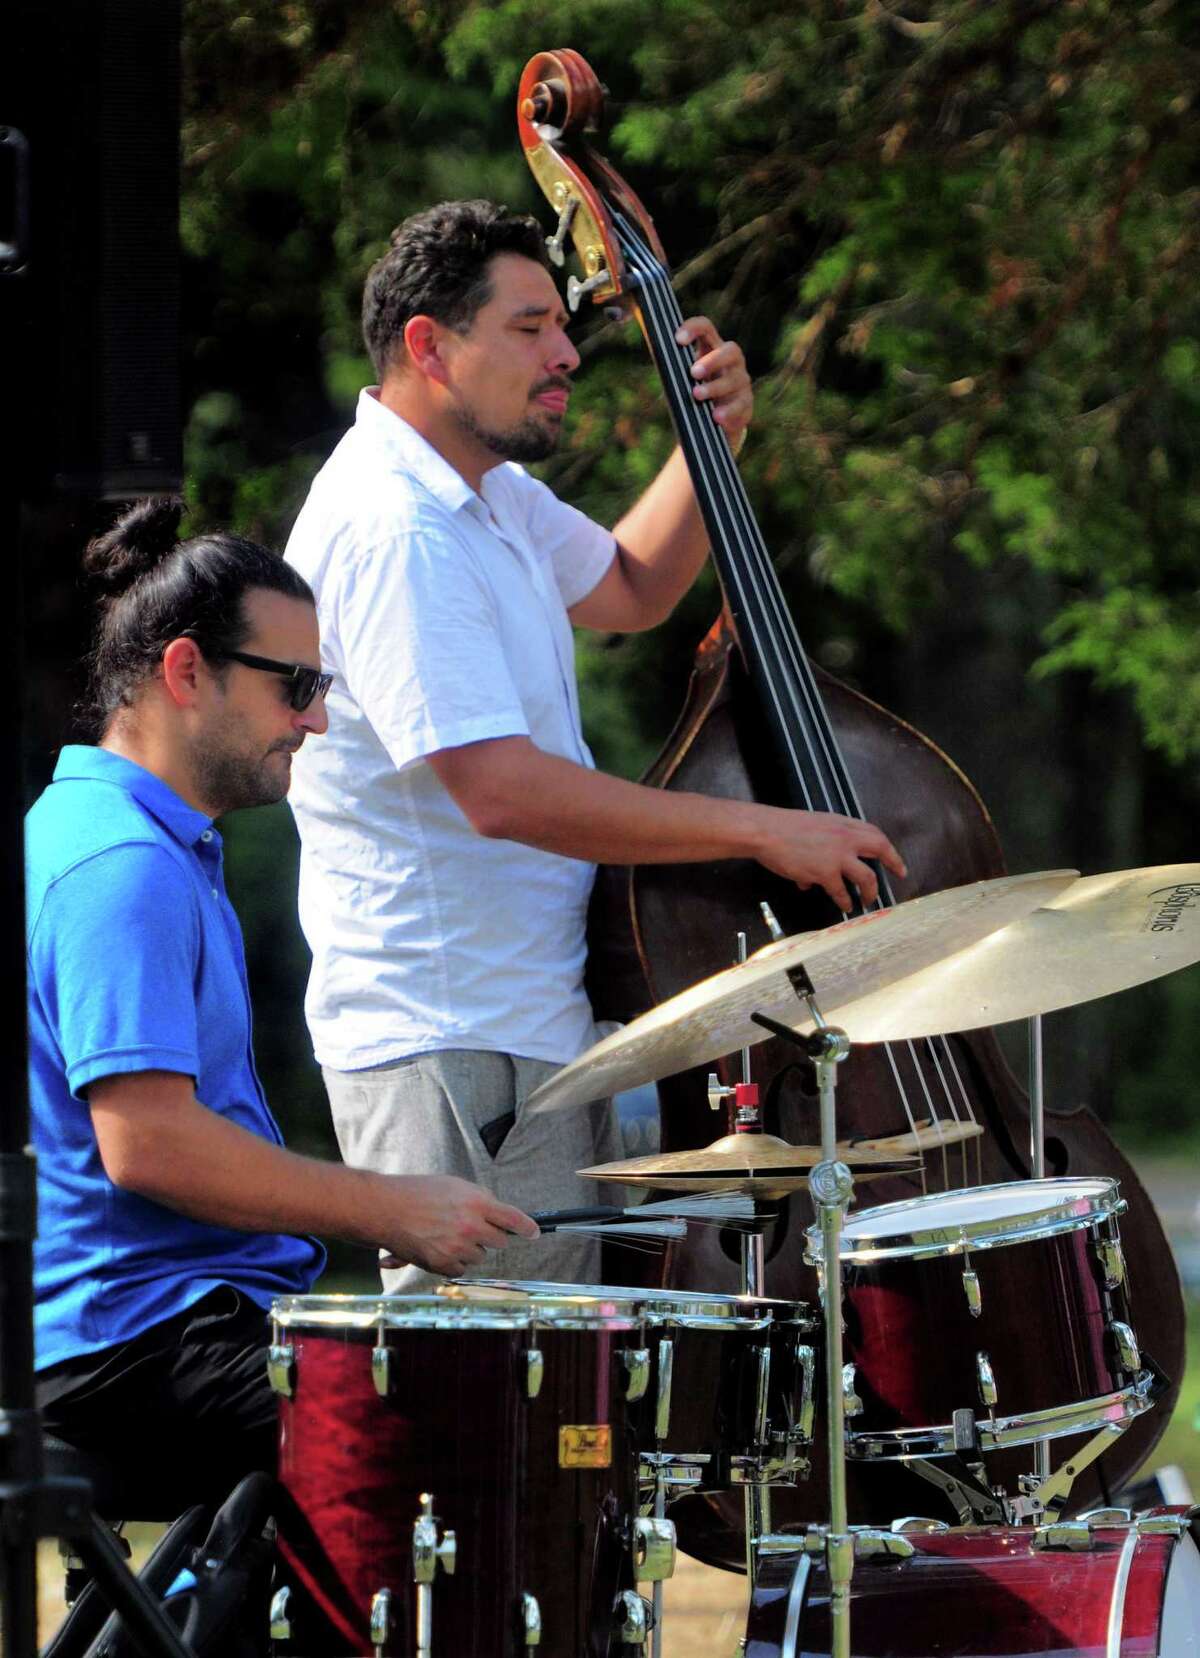 Dan Pugach on drums and Josh Hari on bass, with Oh La La! perform during the Friends of Greenwich Point Summer Concerts!